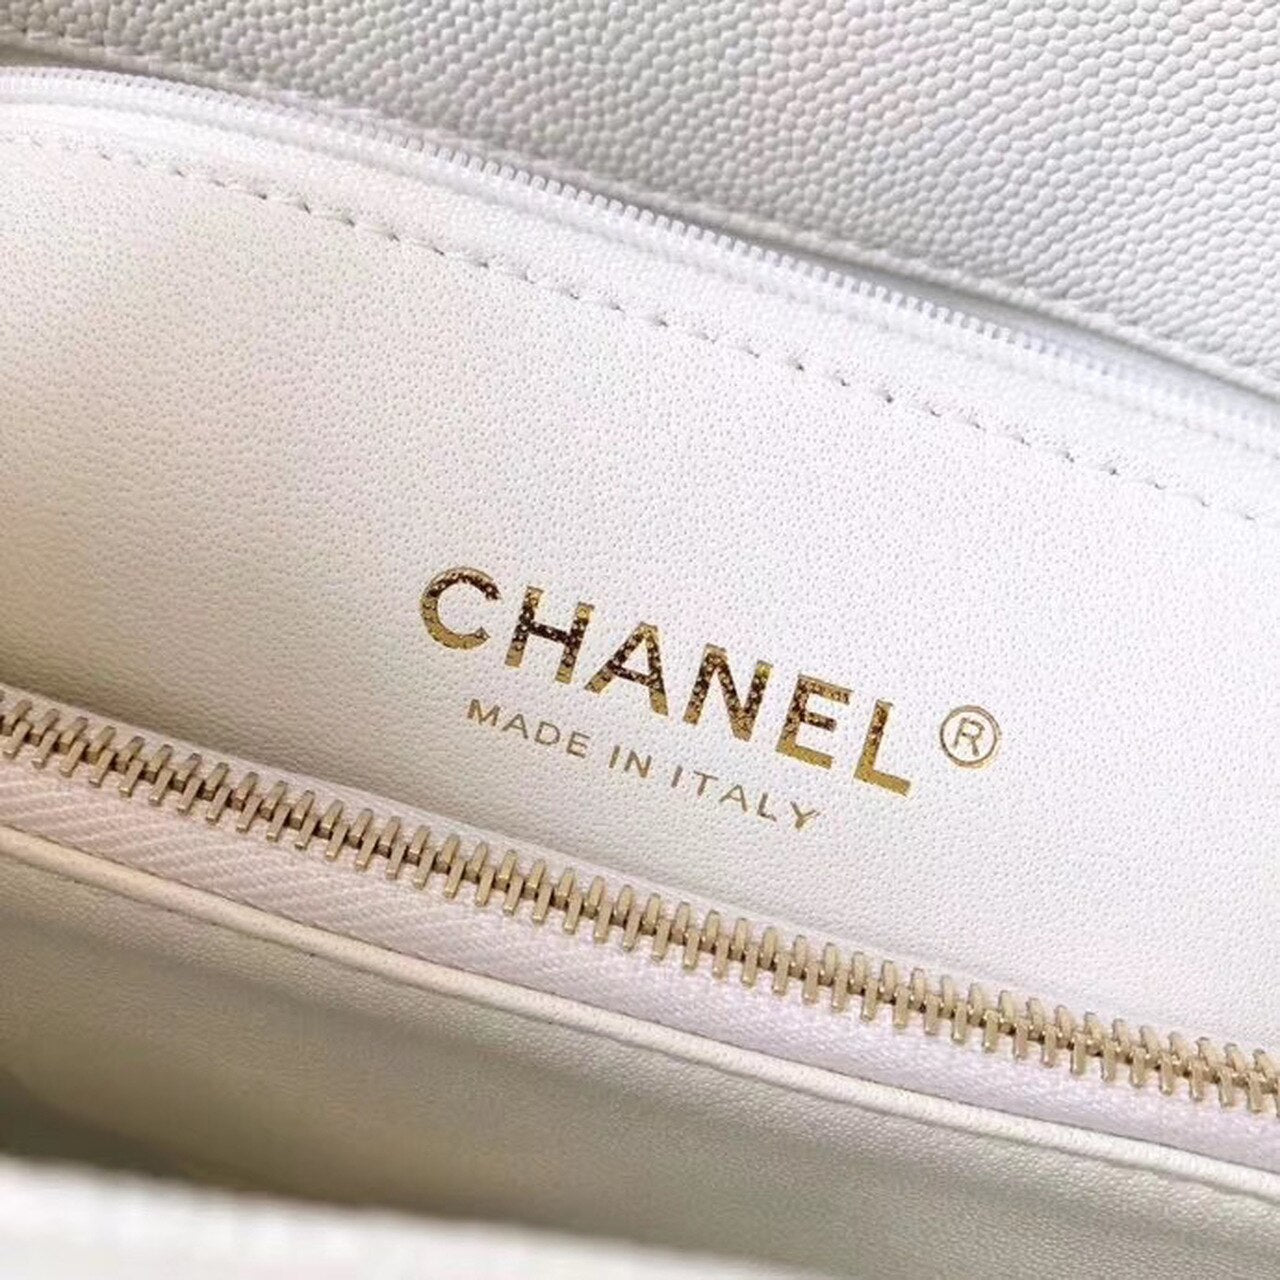 Chanel Coco Handle Quilted Lizard Handle Bag 24cm Caviar Leather Gold Hardware Spring/Summer Act 1 Collection, White